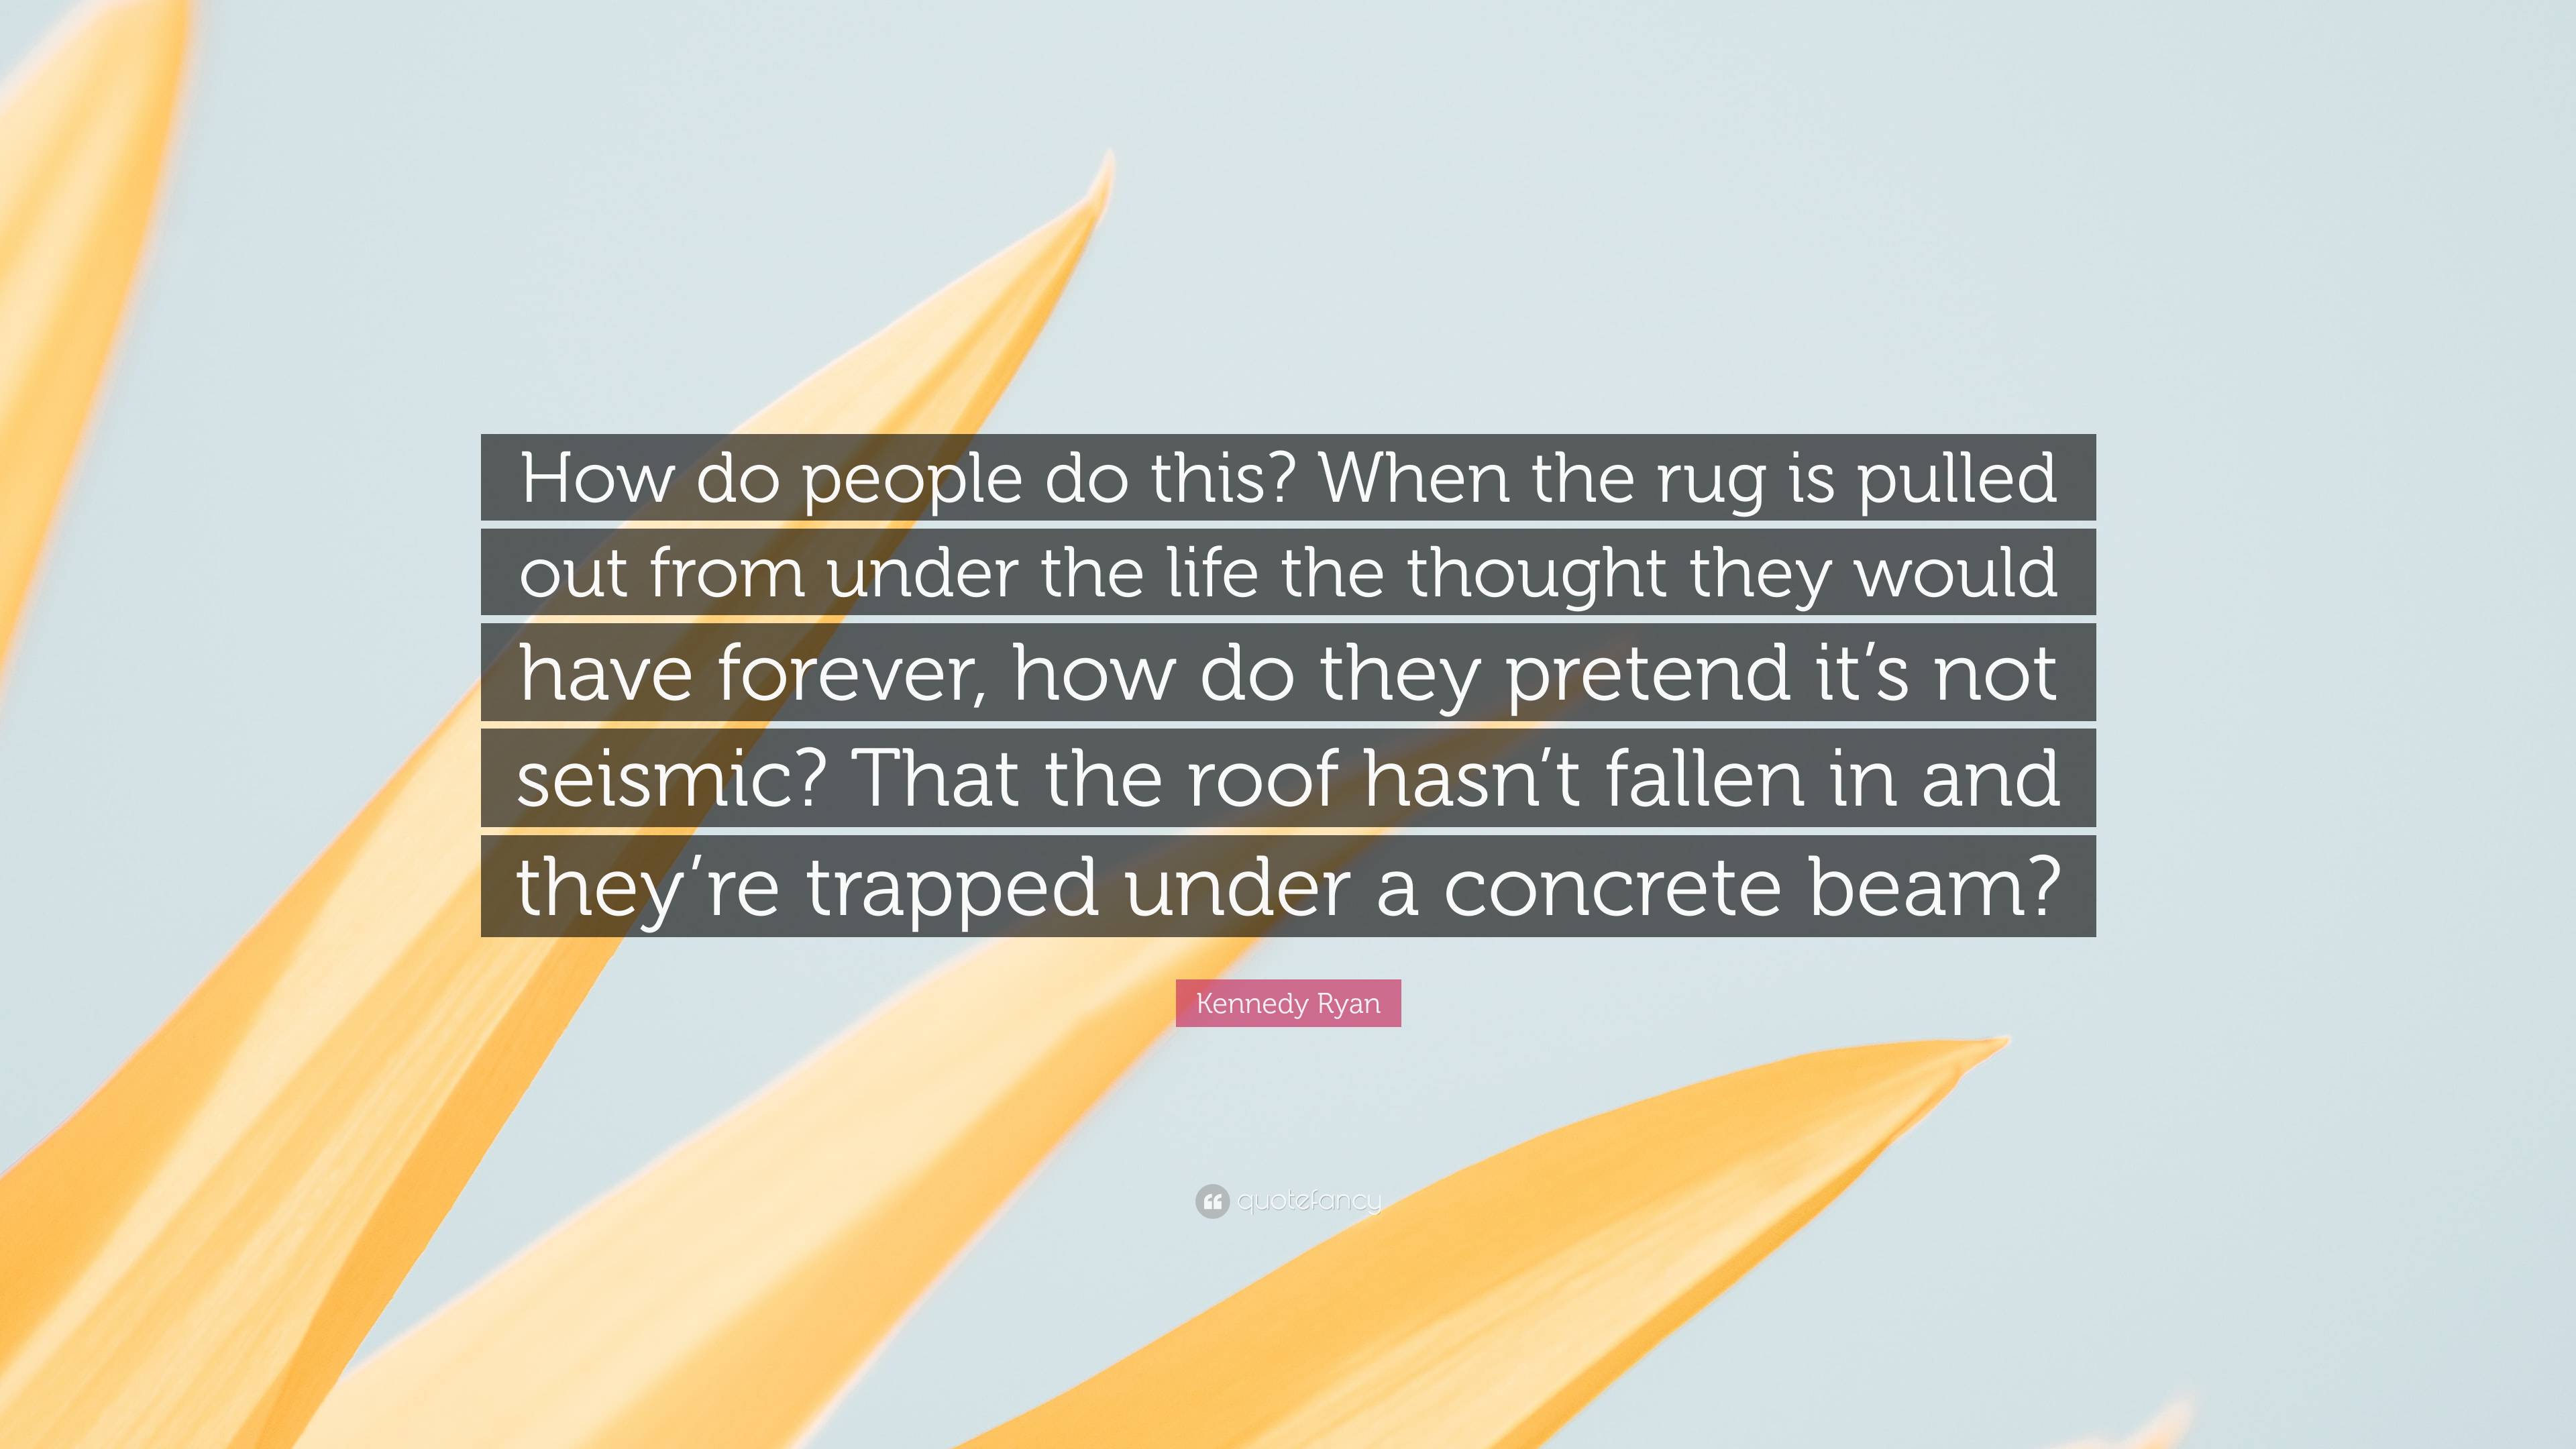 Kennedy Ryan Quote: “How do people do this? When the rug is pulled out ...